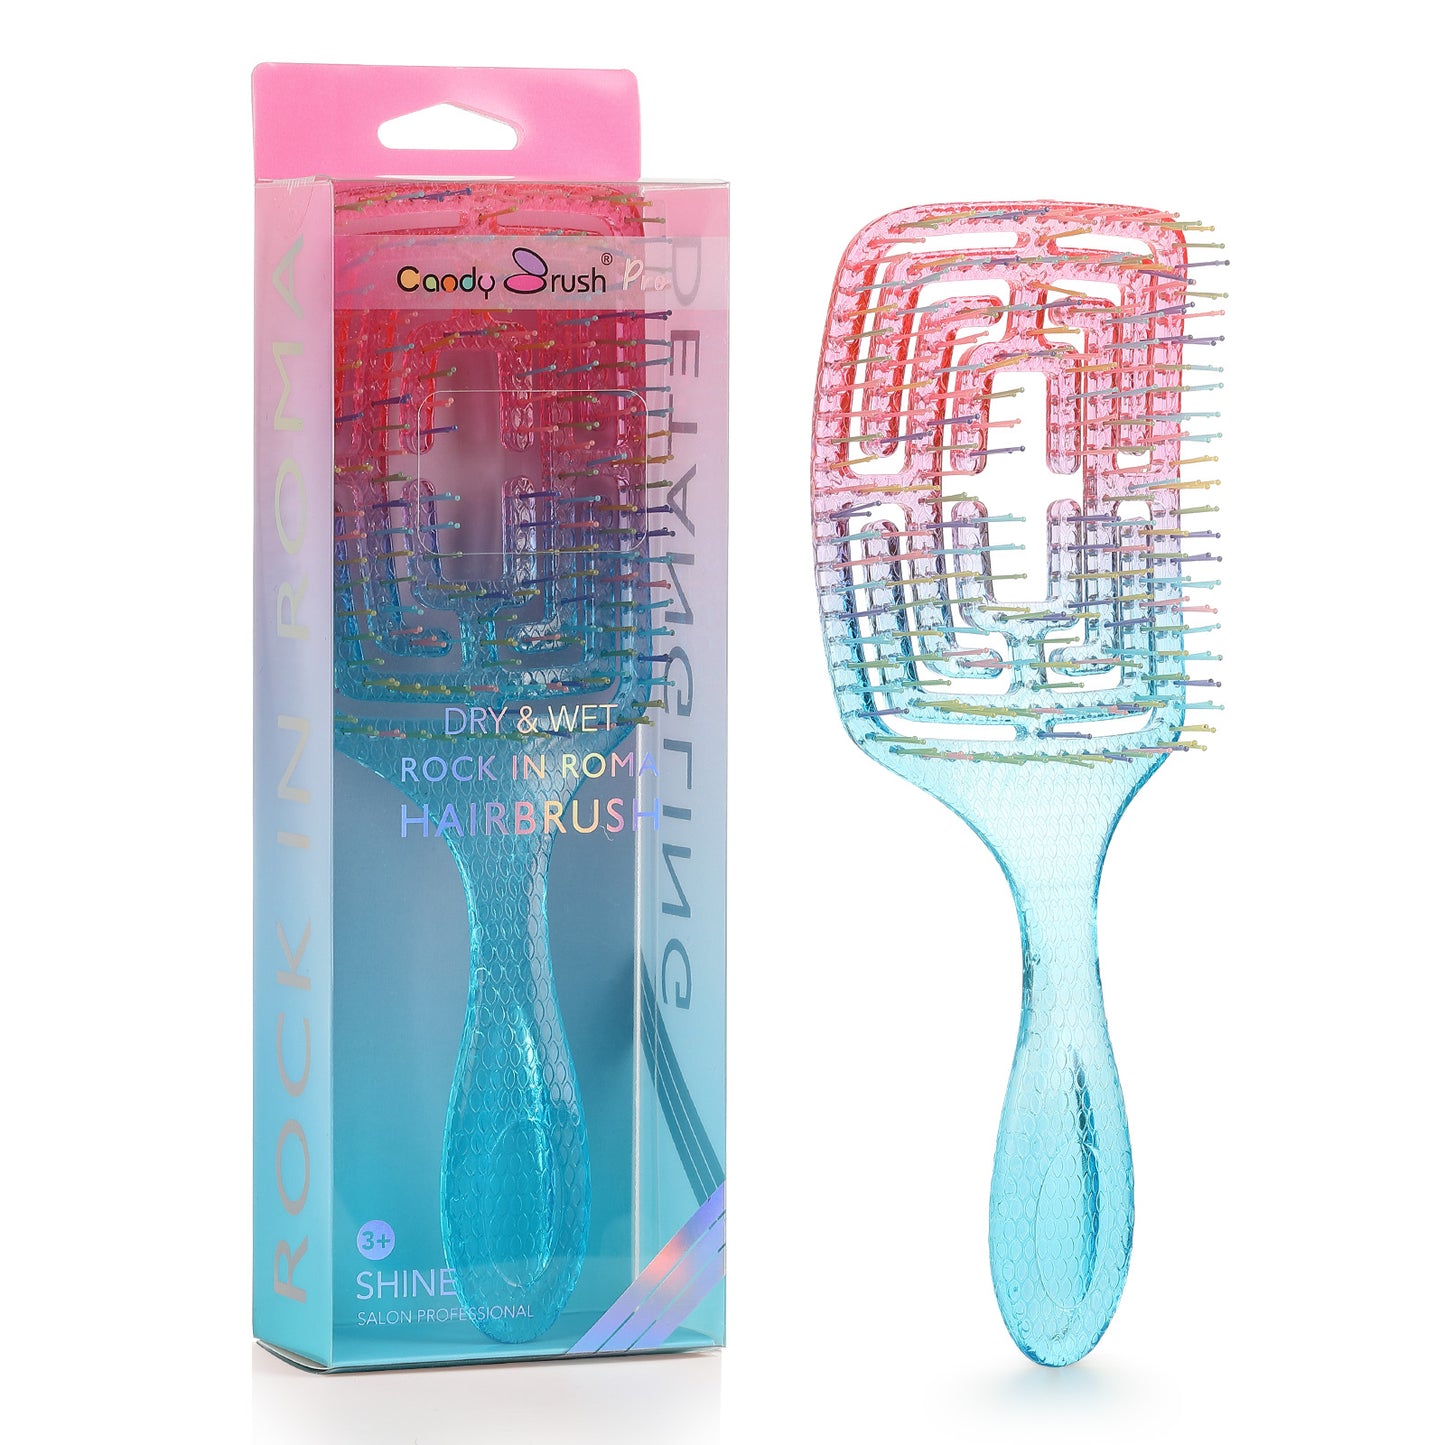 Curved Vented Hair Brush Detangling for Blow Drying Colorful Wet